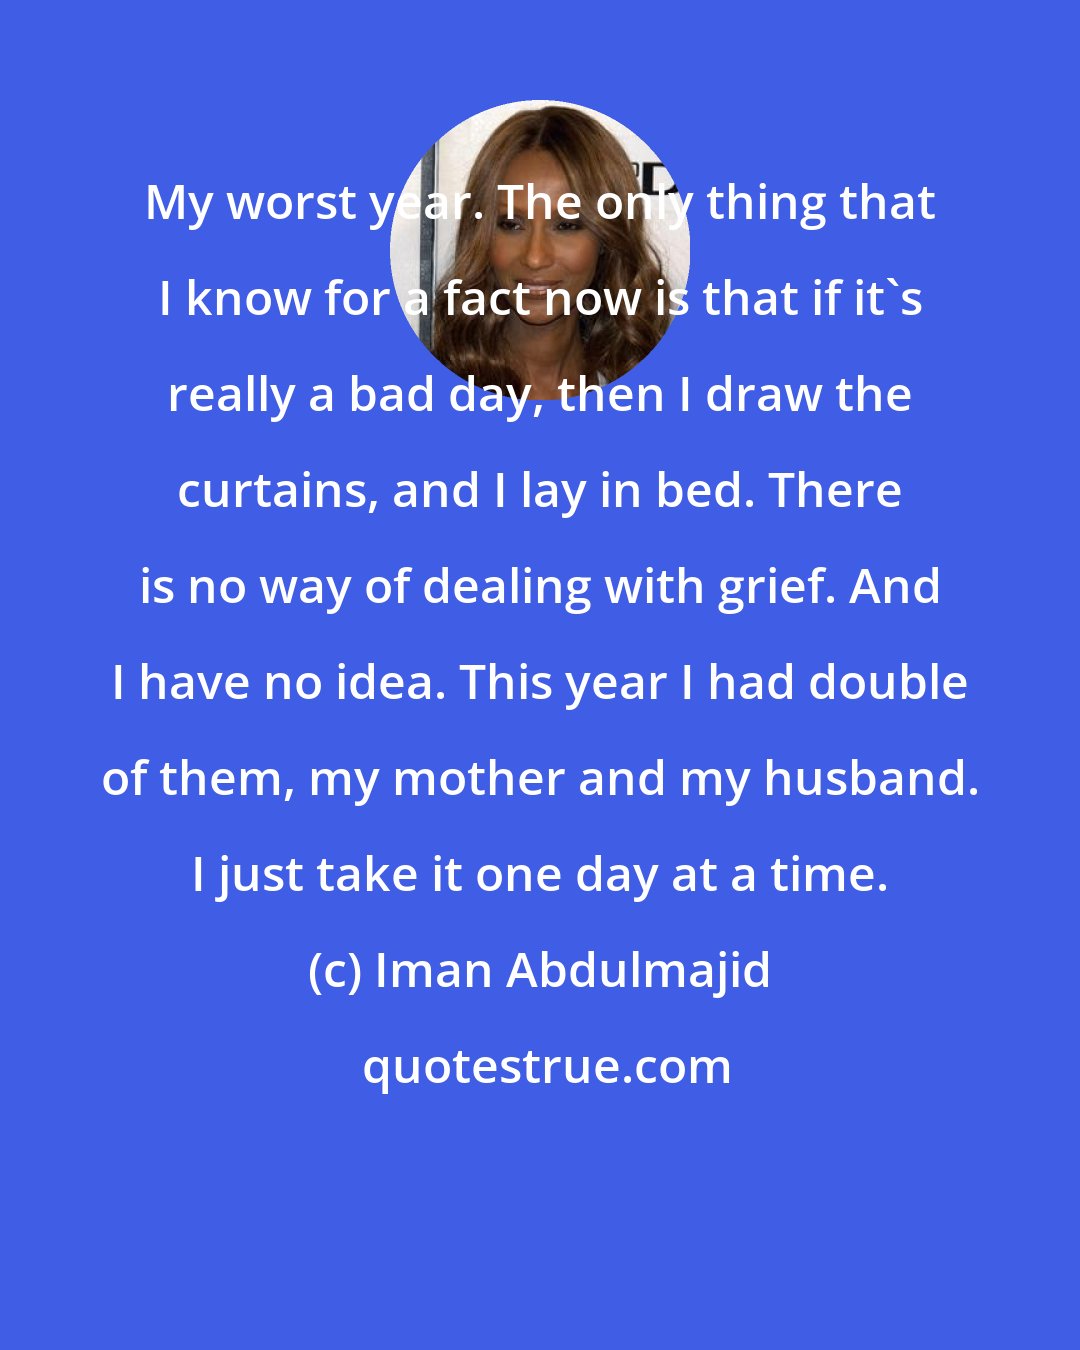 Iman Abdulmajid: My worst year. The only thing that I know for a fact now is that if it's really a bad day, then I draw the curtains, and I lay in bed. There is no way of dealing with grief. And I have no idea. This year I had double of them, my mother and my husband. I just take it one day at a time.